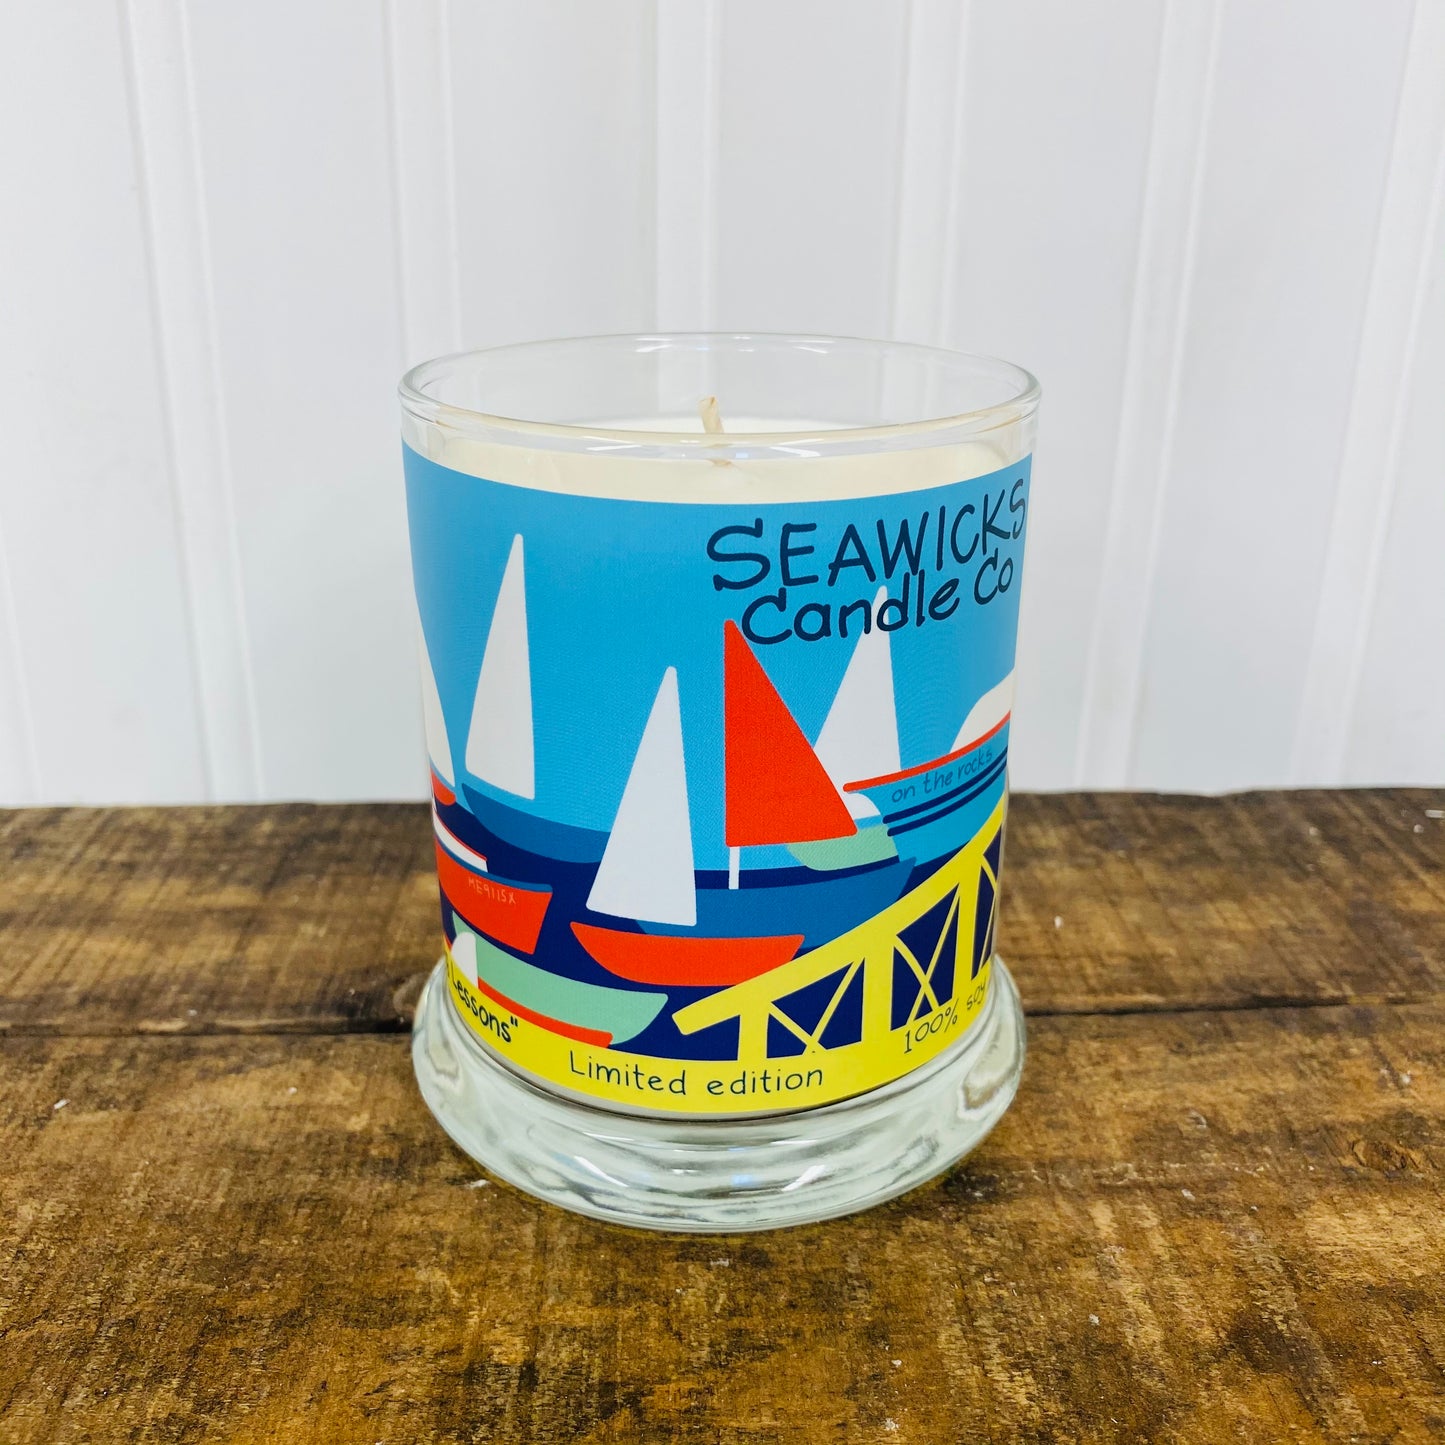 Limited Edition ‘SAILING LESSONS’ Candle